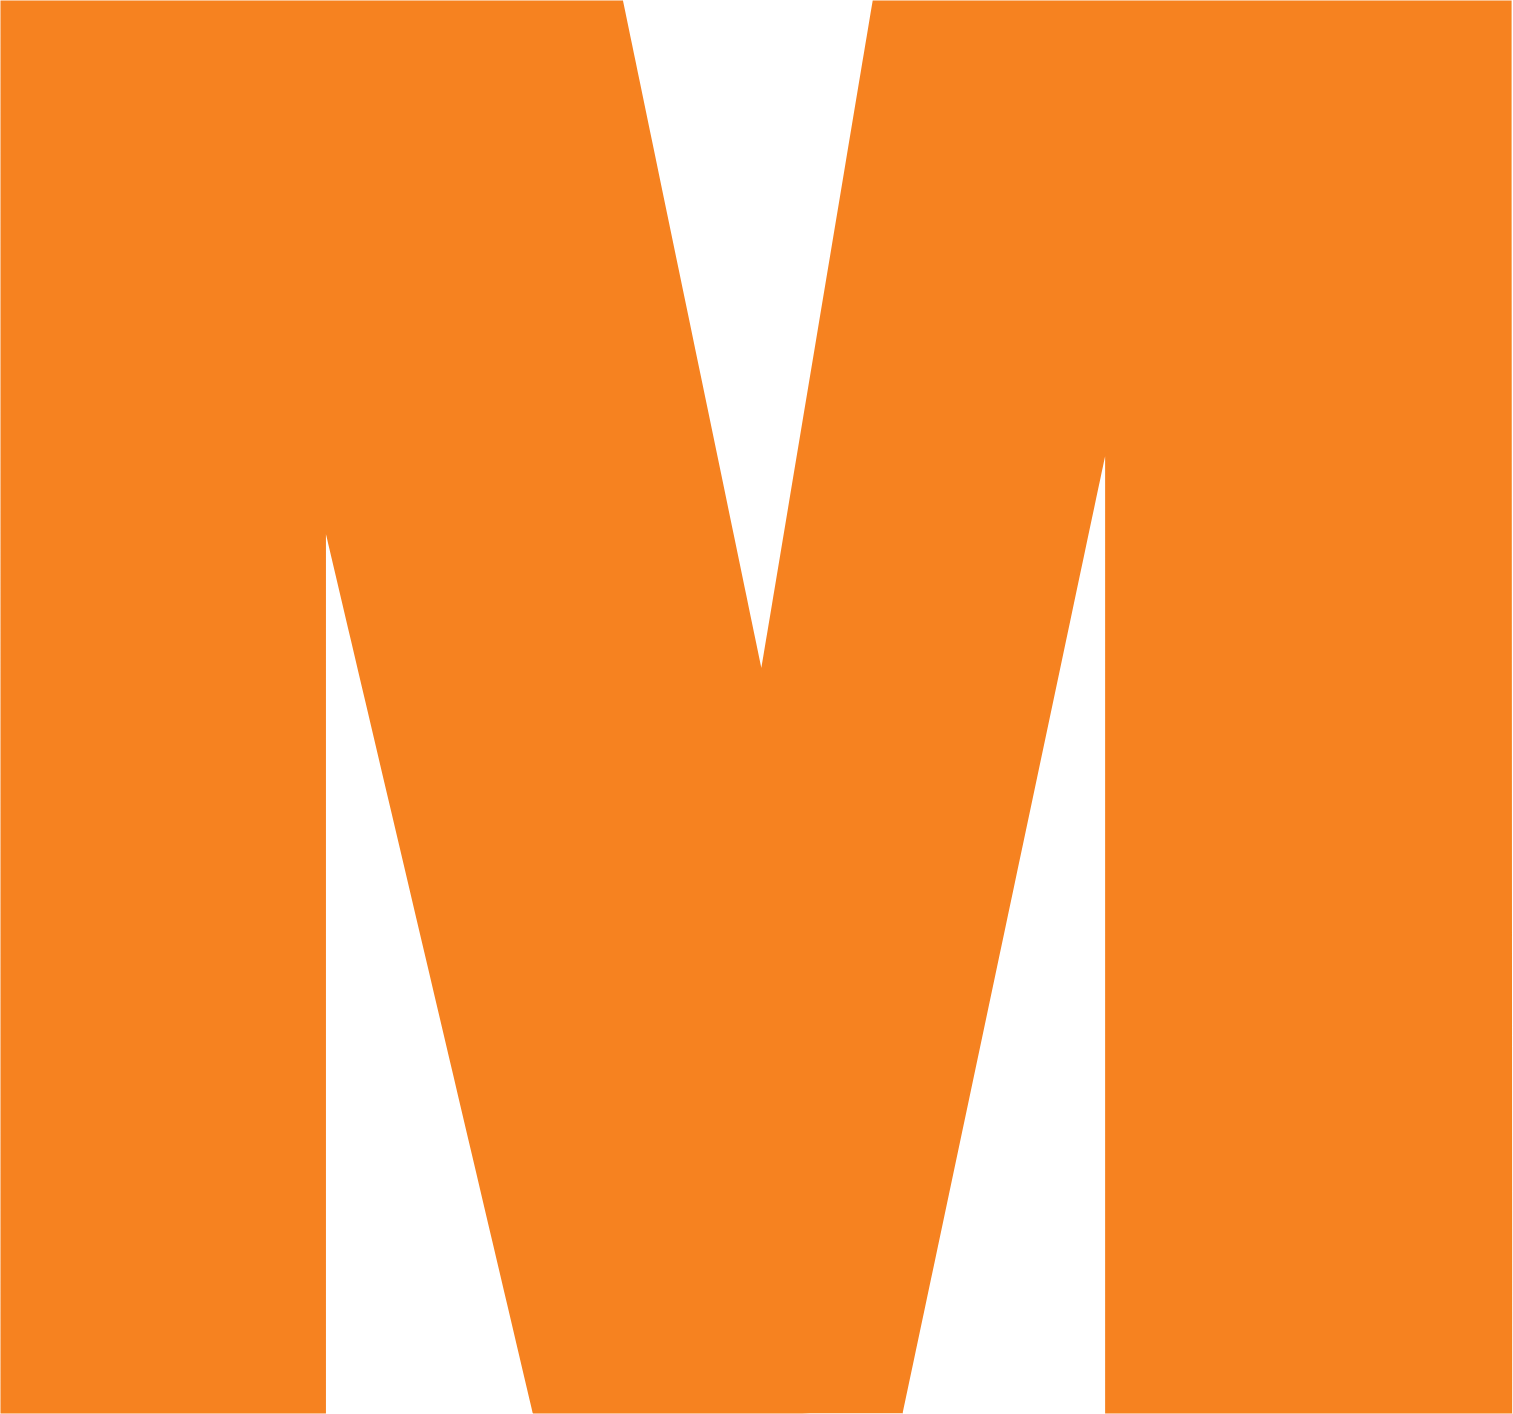 Migros Ticaret A.S. logo in transparent PNG and vectorized SVG formats